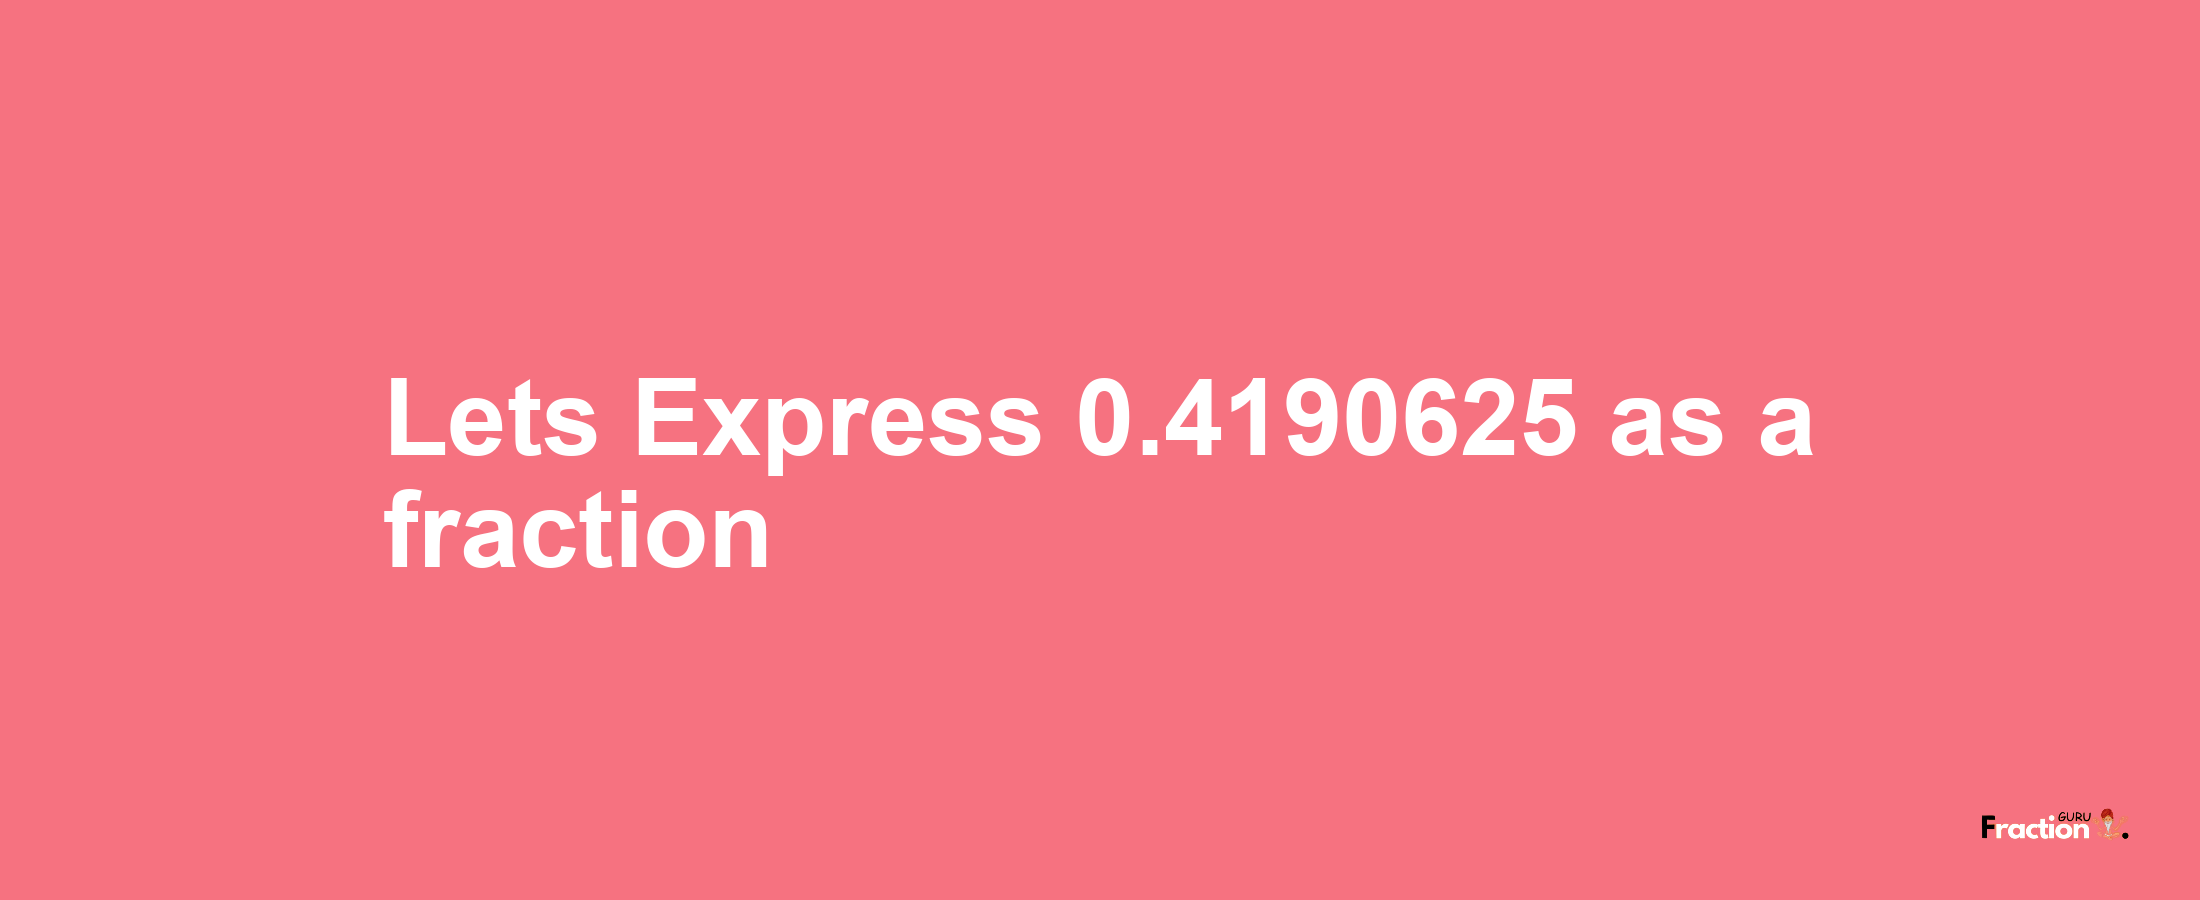 Lets Express 0.4190625 as afraction